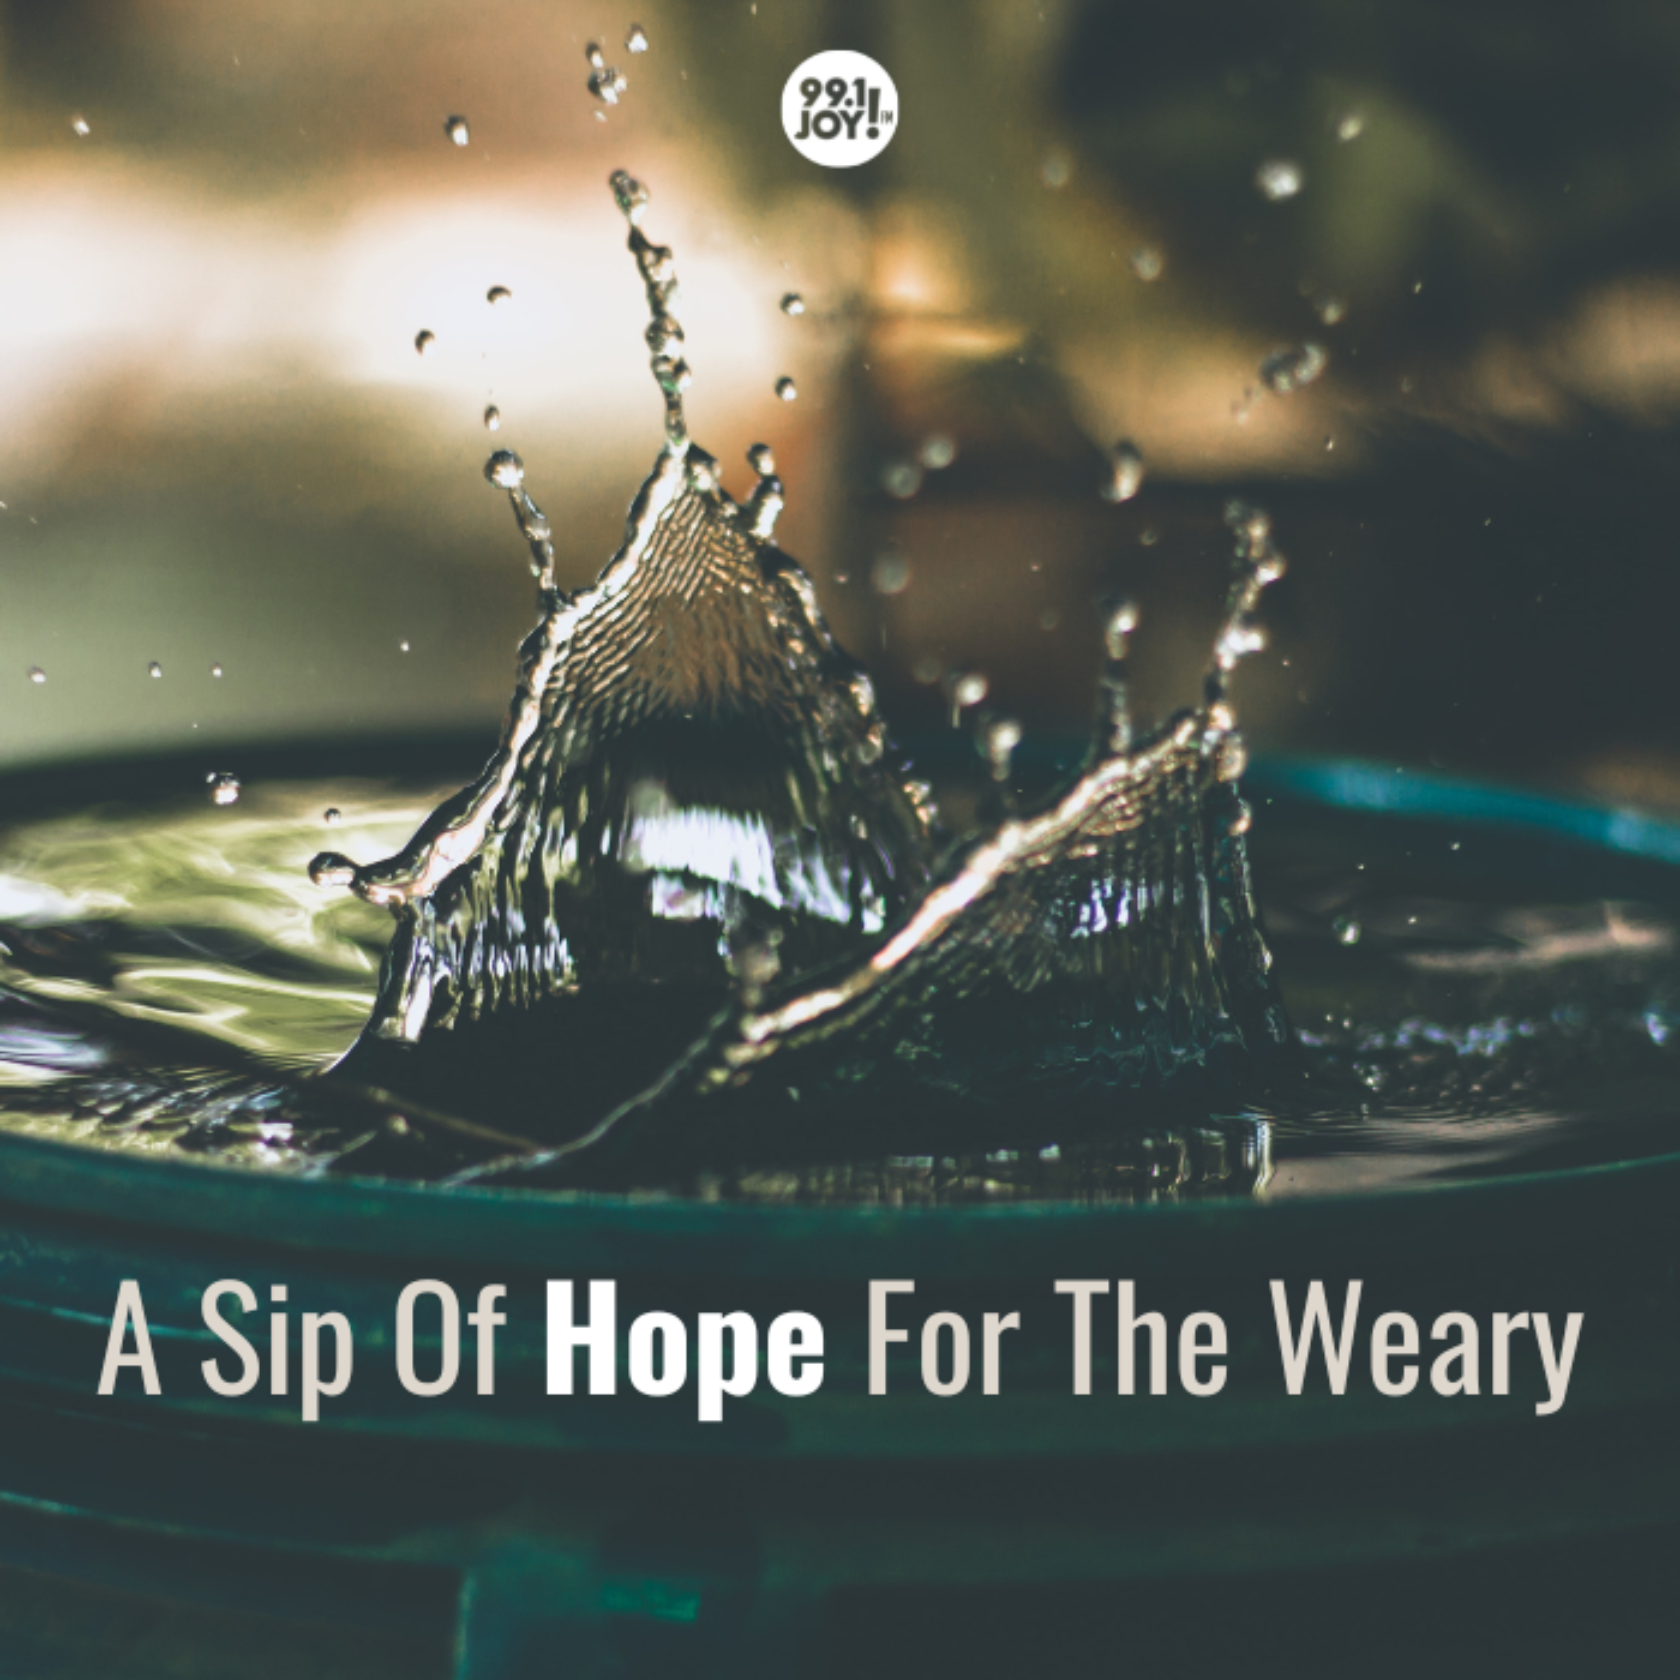 A Sip Of Hope For The Weary